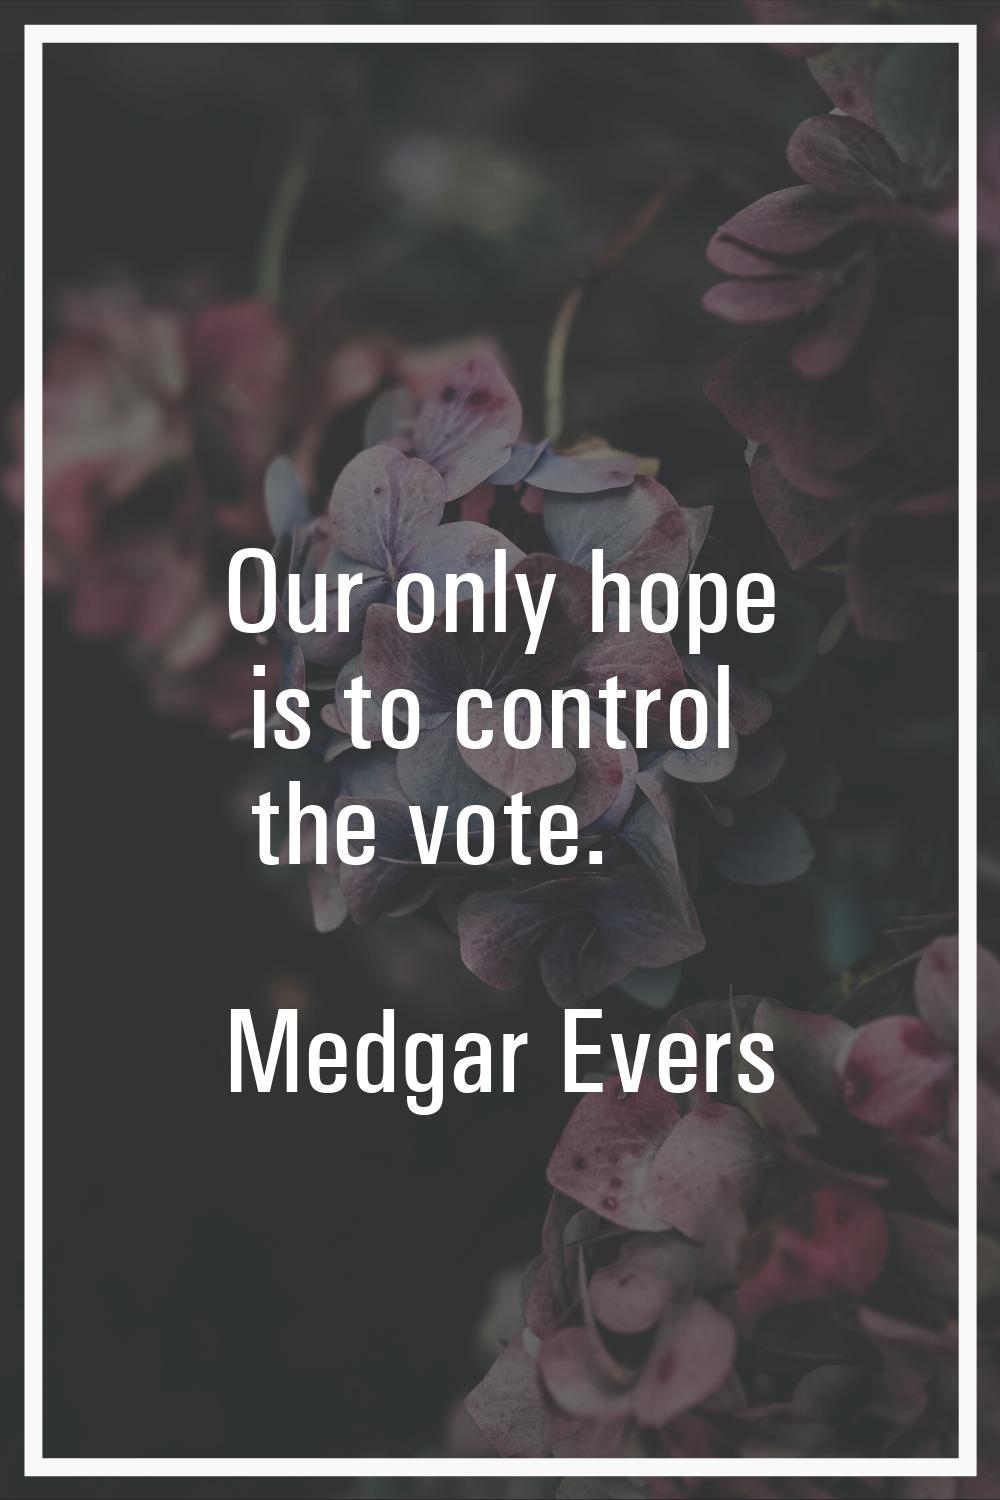 Our only hope is to control the vote.